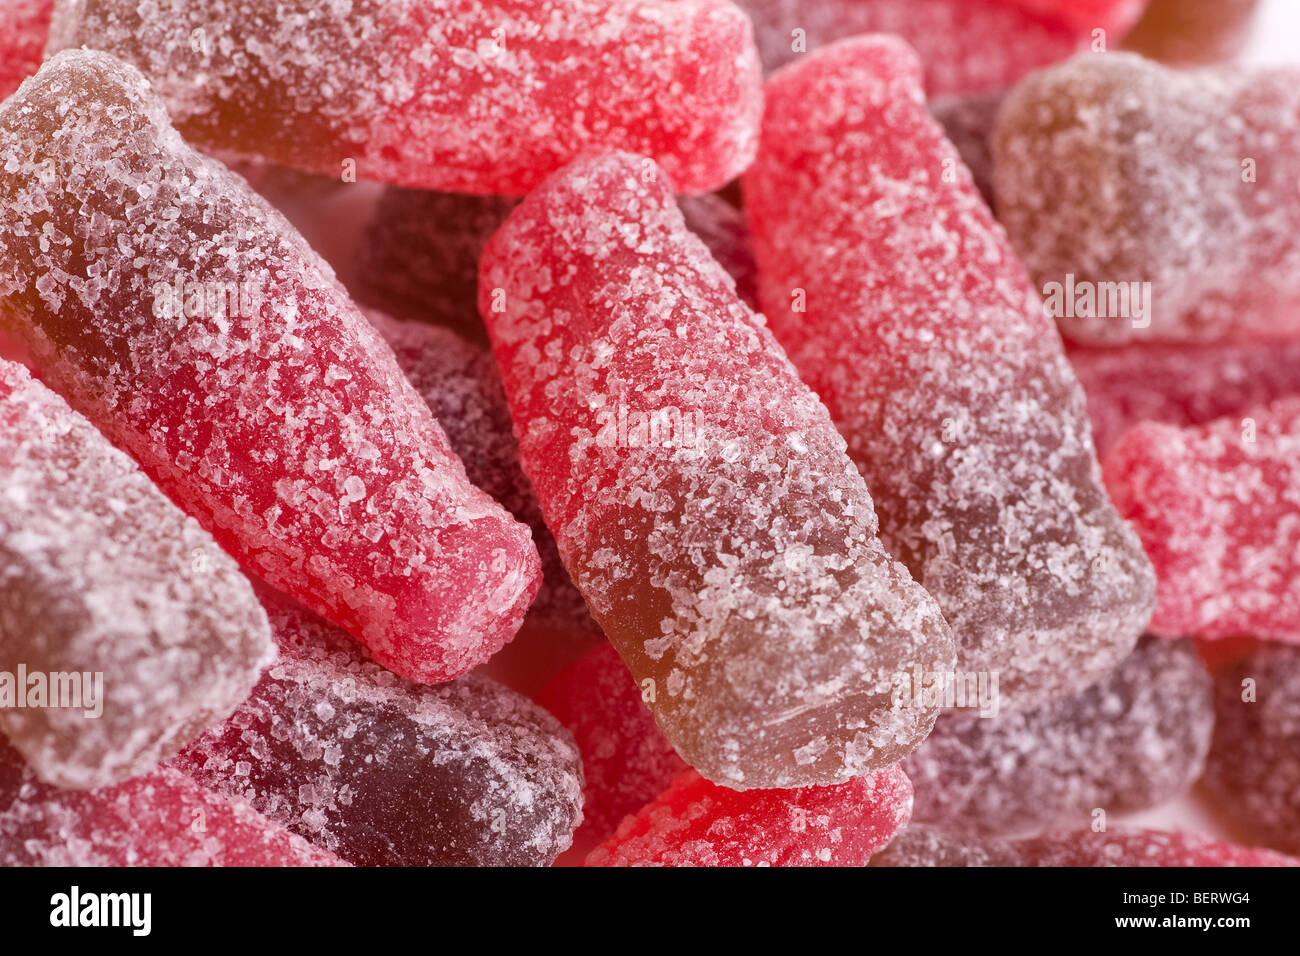 Fizzy Cherry Cola Bottle Sweets: Close-Up Stock Photo